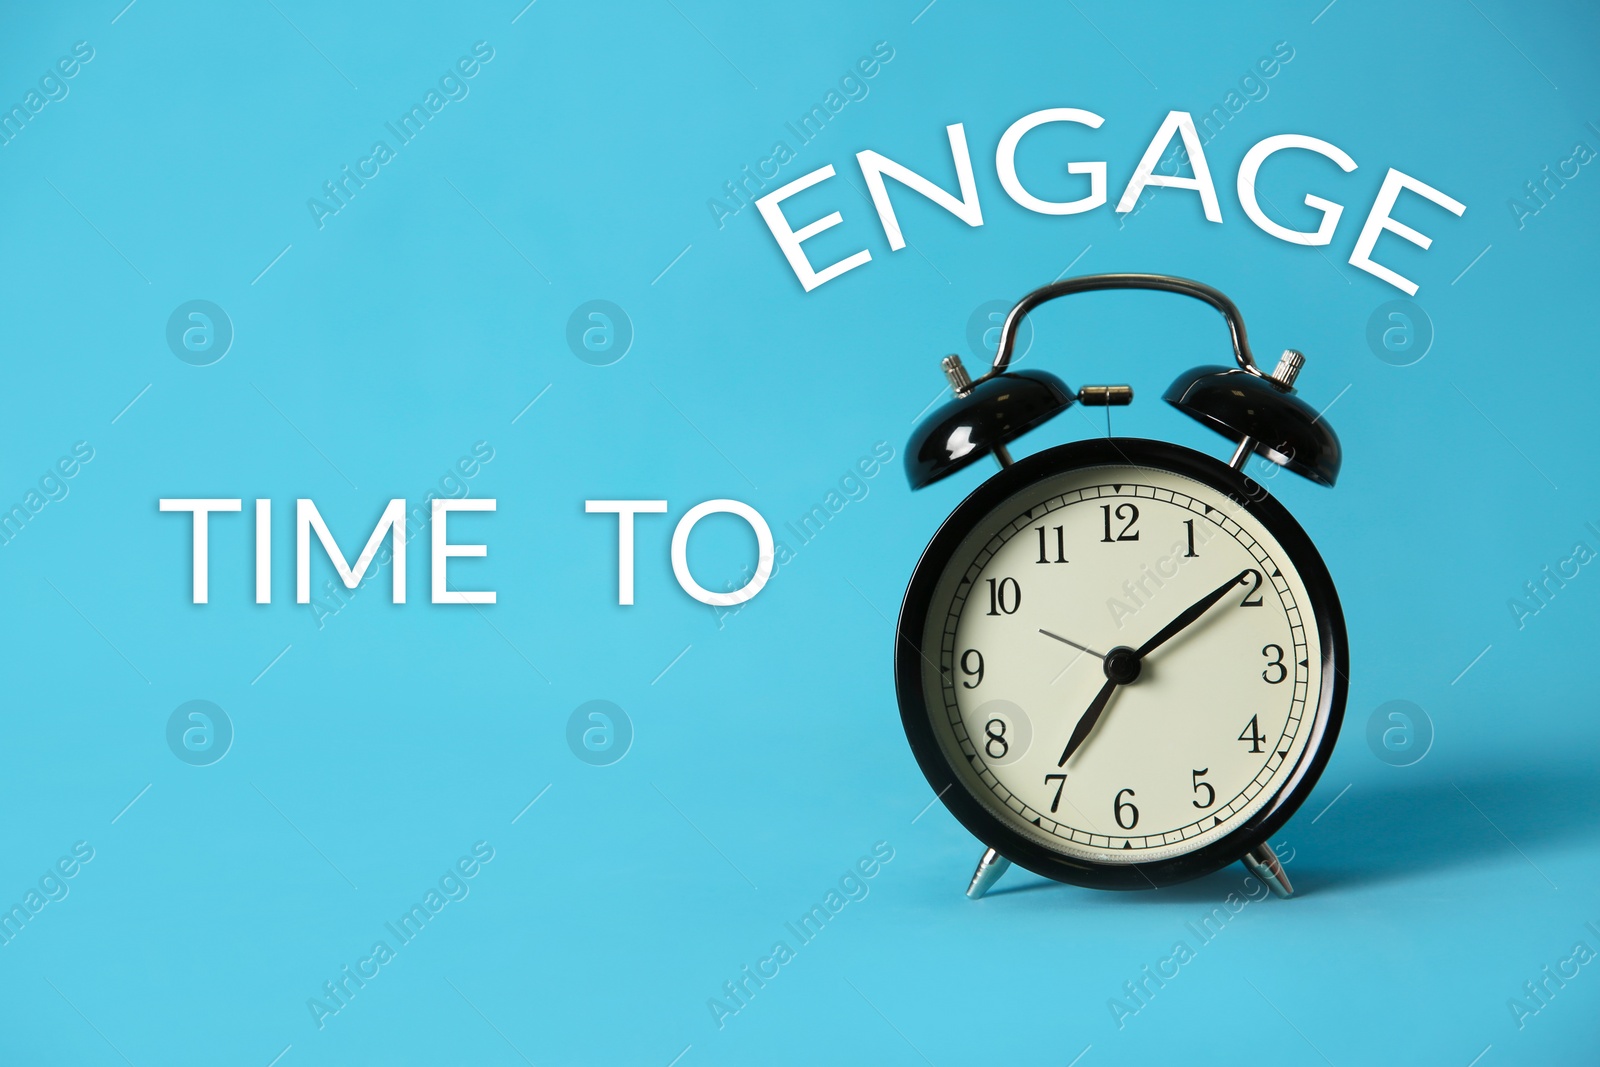 Image of Alarm clock and phrase TIME TO ENGAGE on light blue background